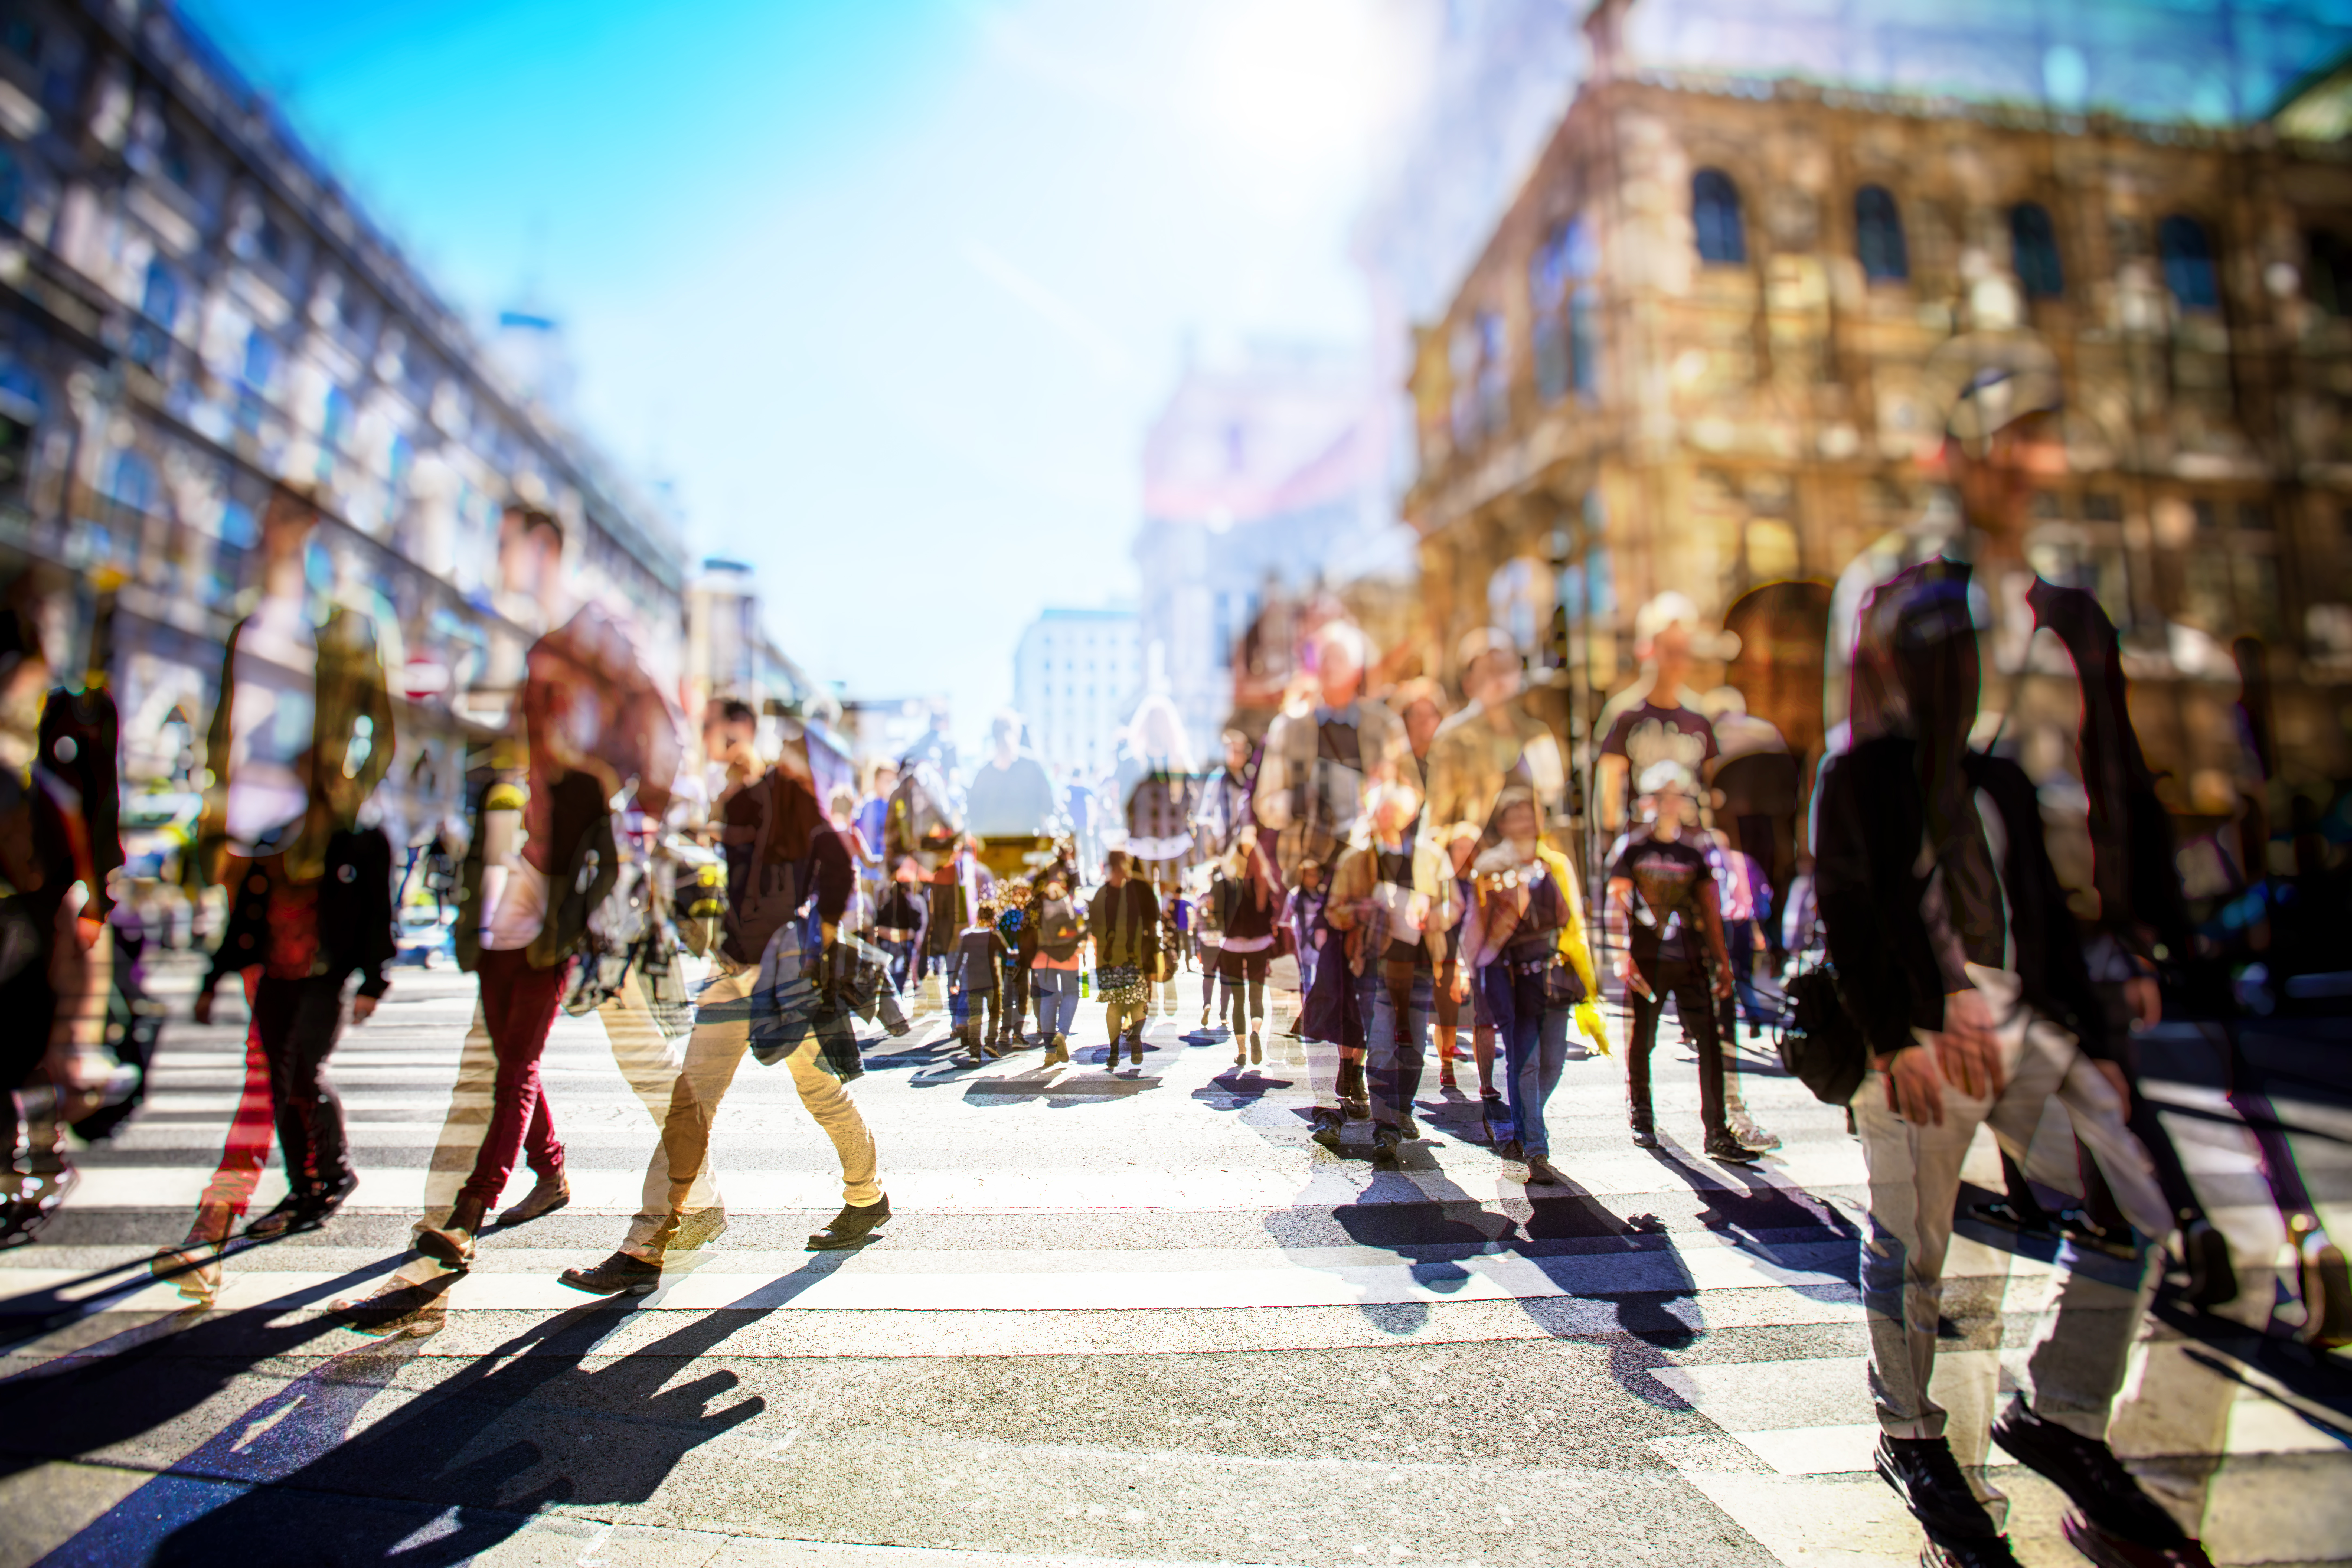 blurred photo of a crowd of people walking on a busy city street